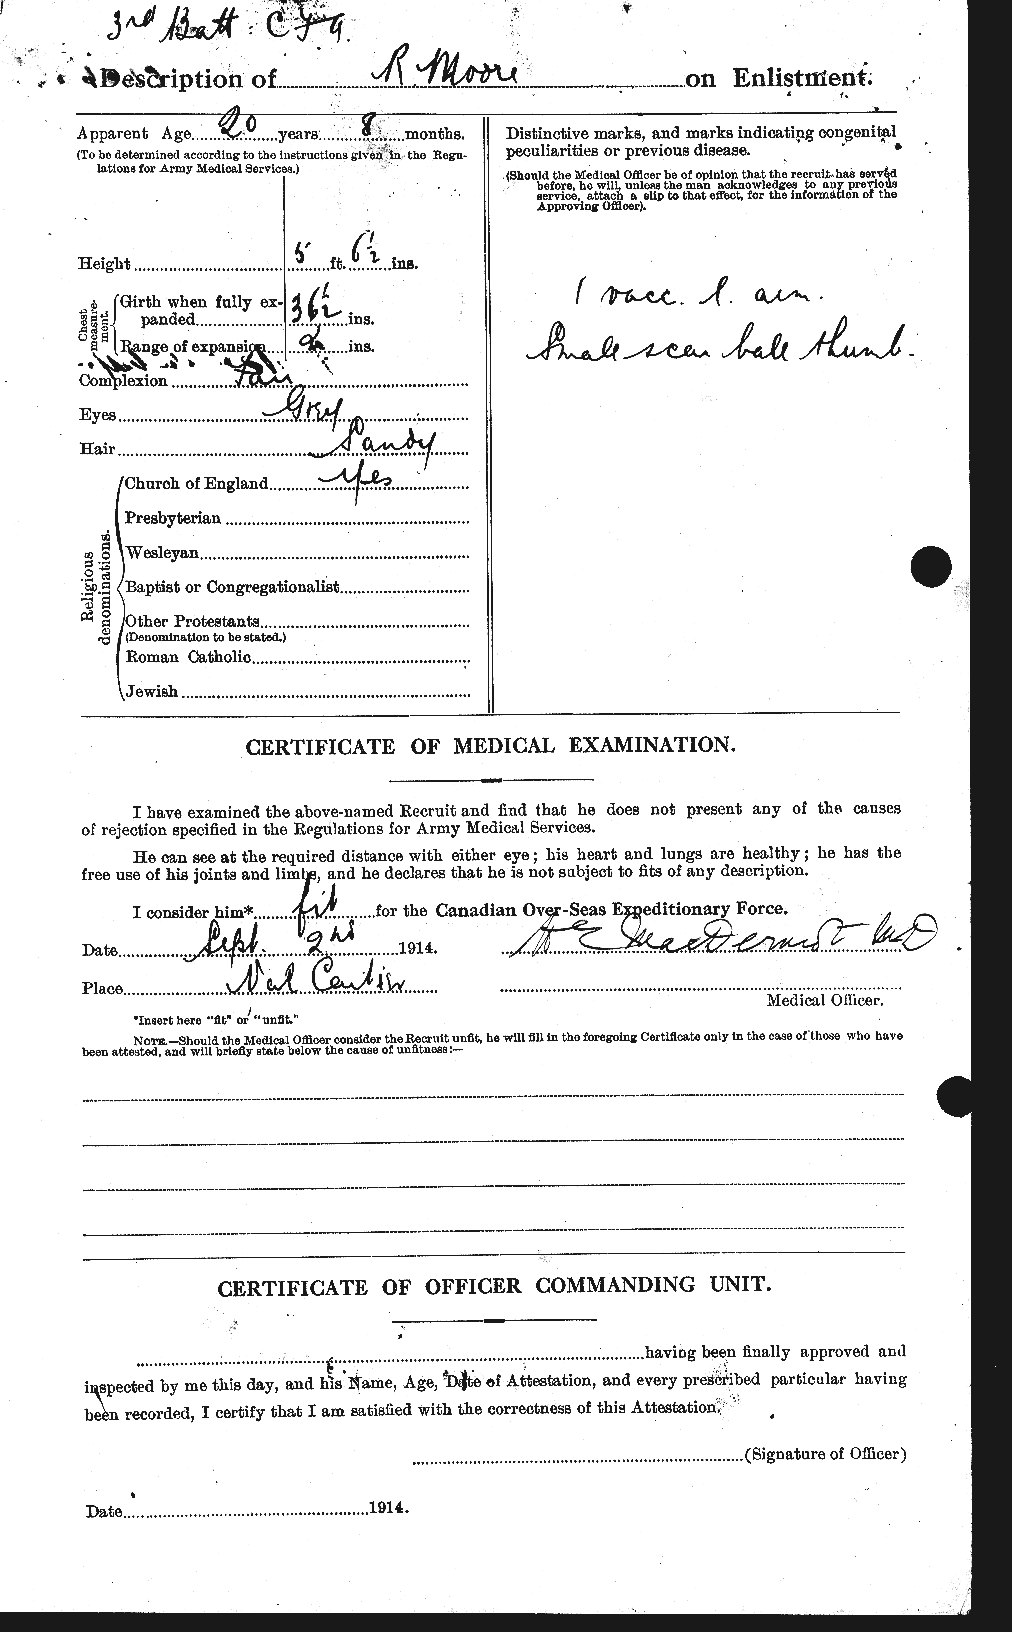 Personnel Records of the First World War - CEF 503517b